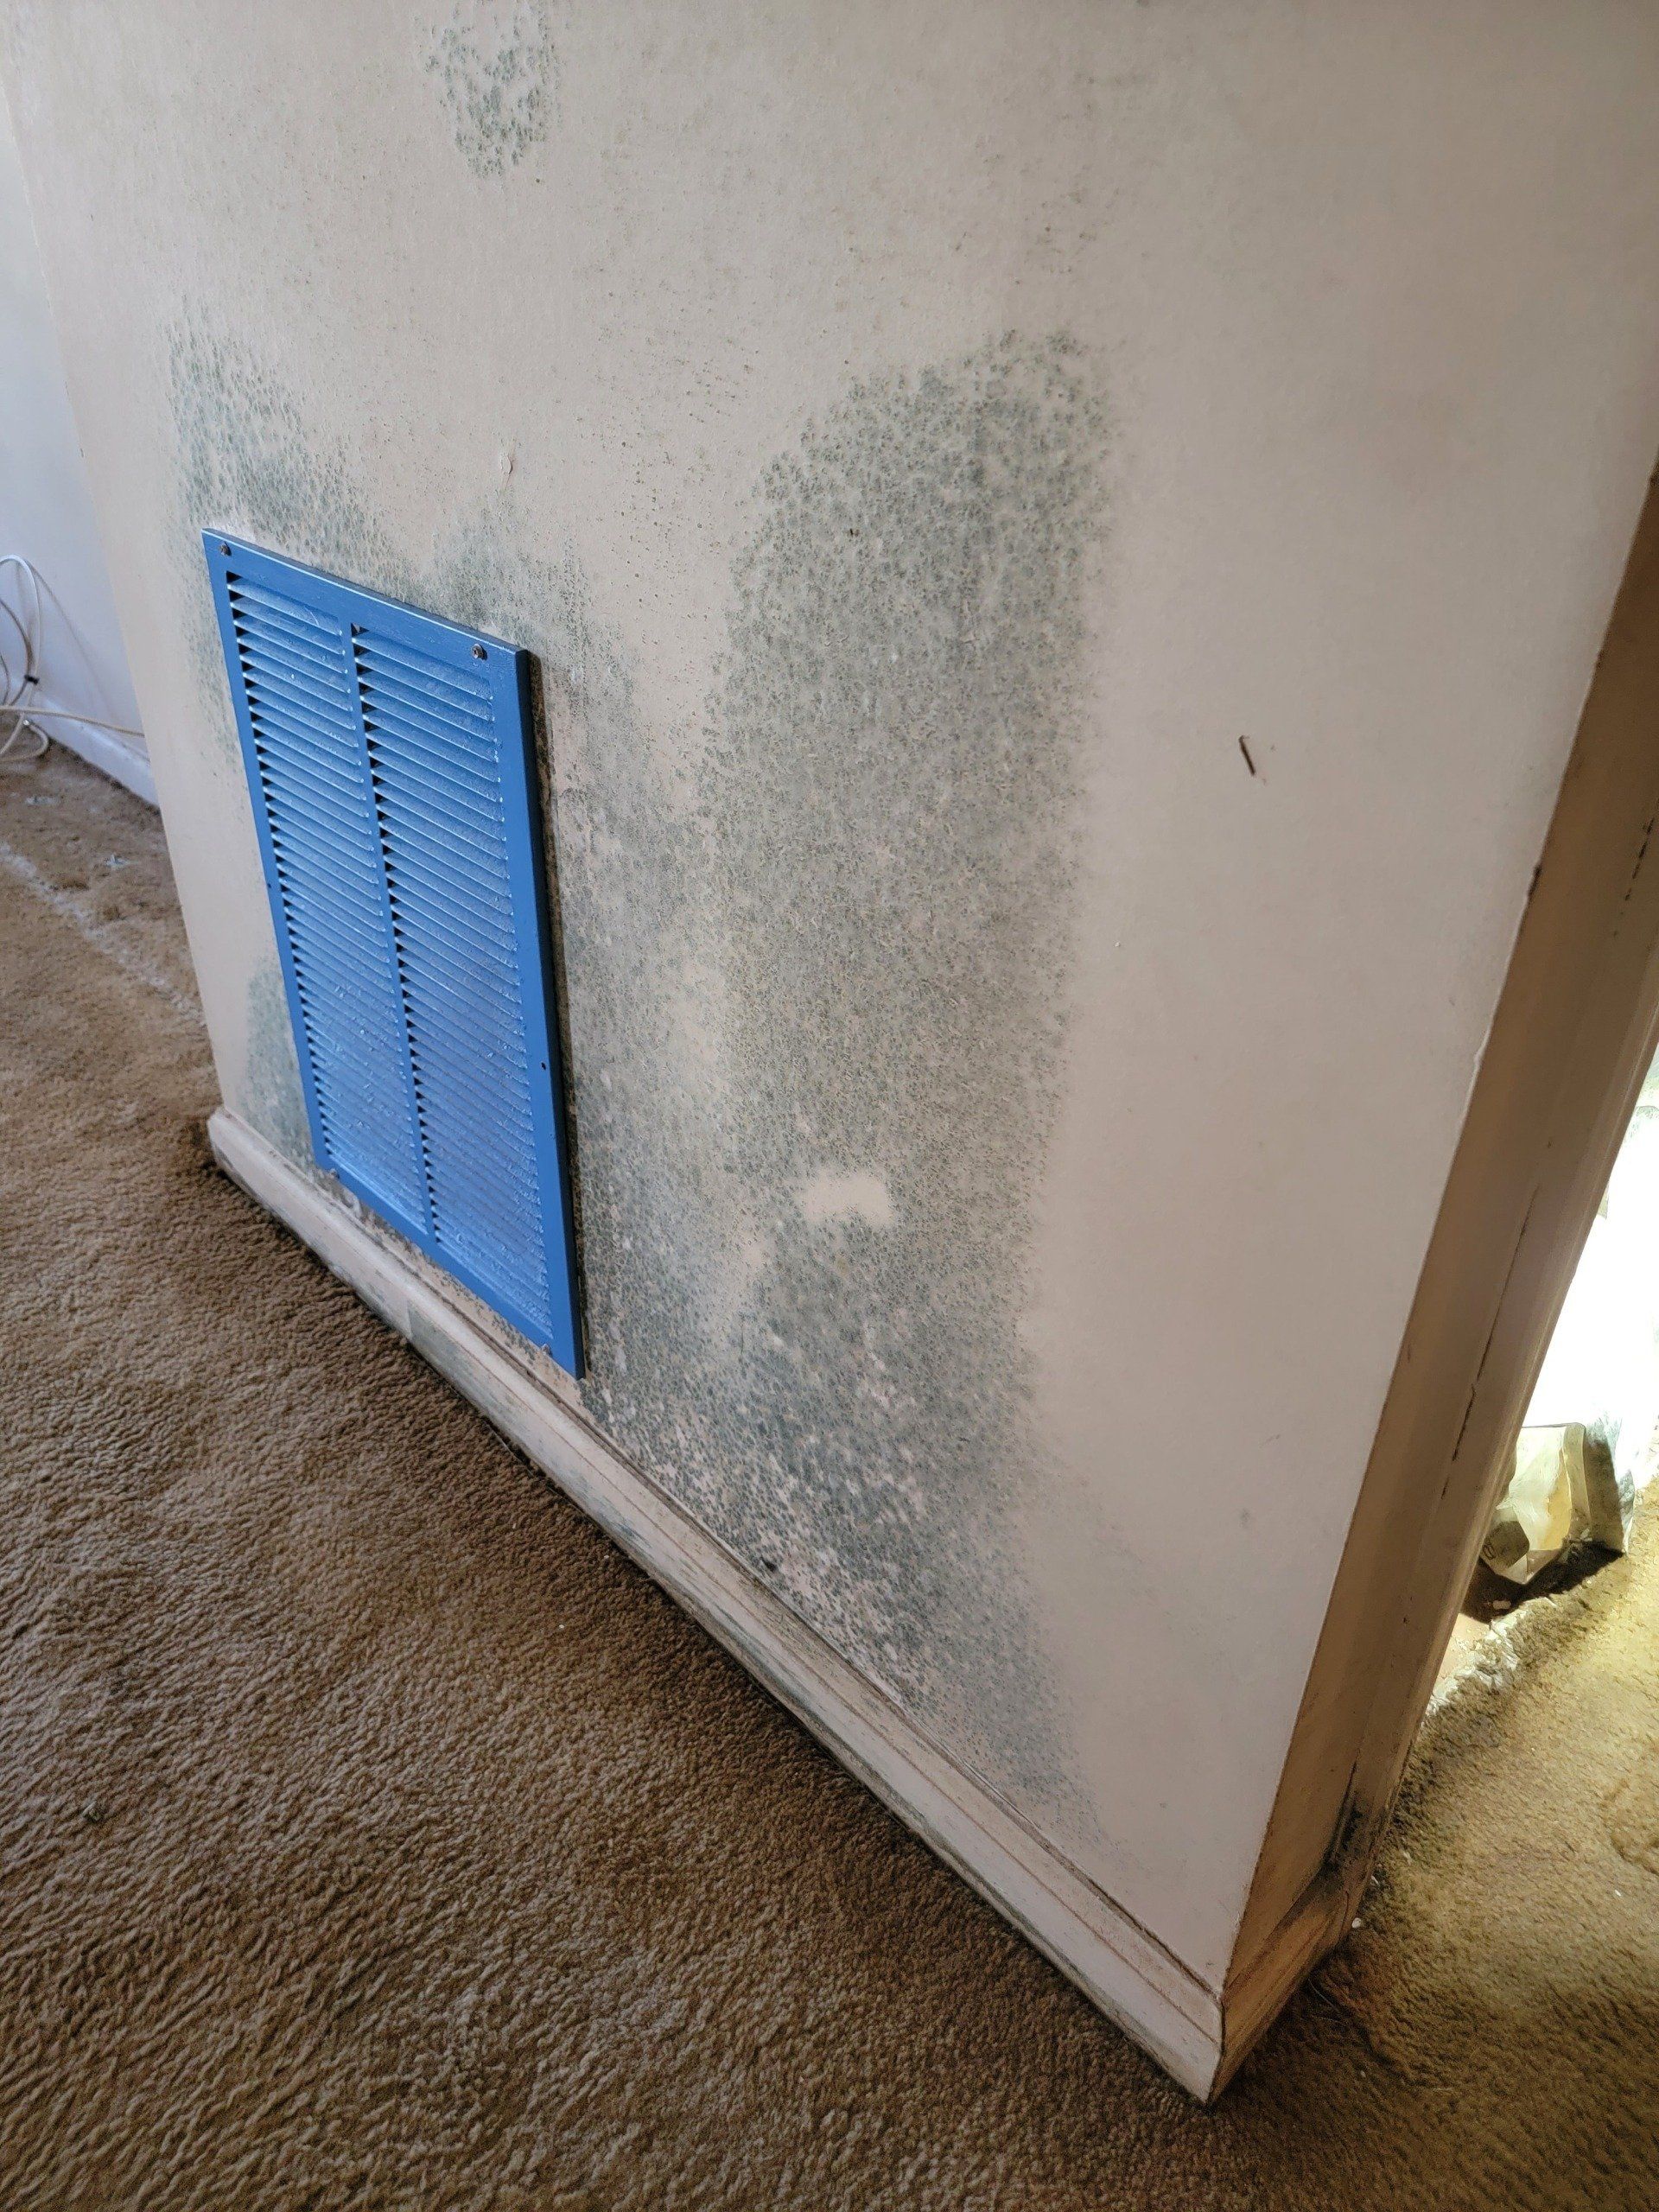 A white wall with black mold on it and a blue door.